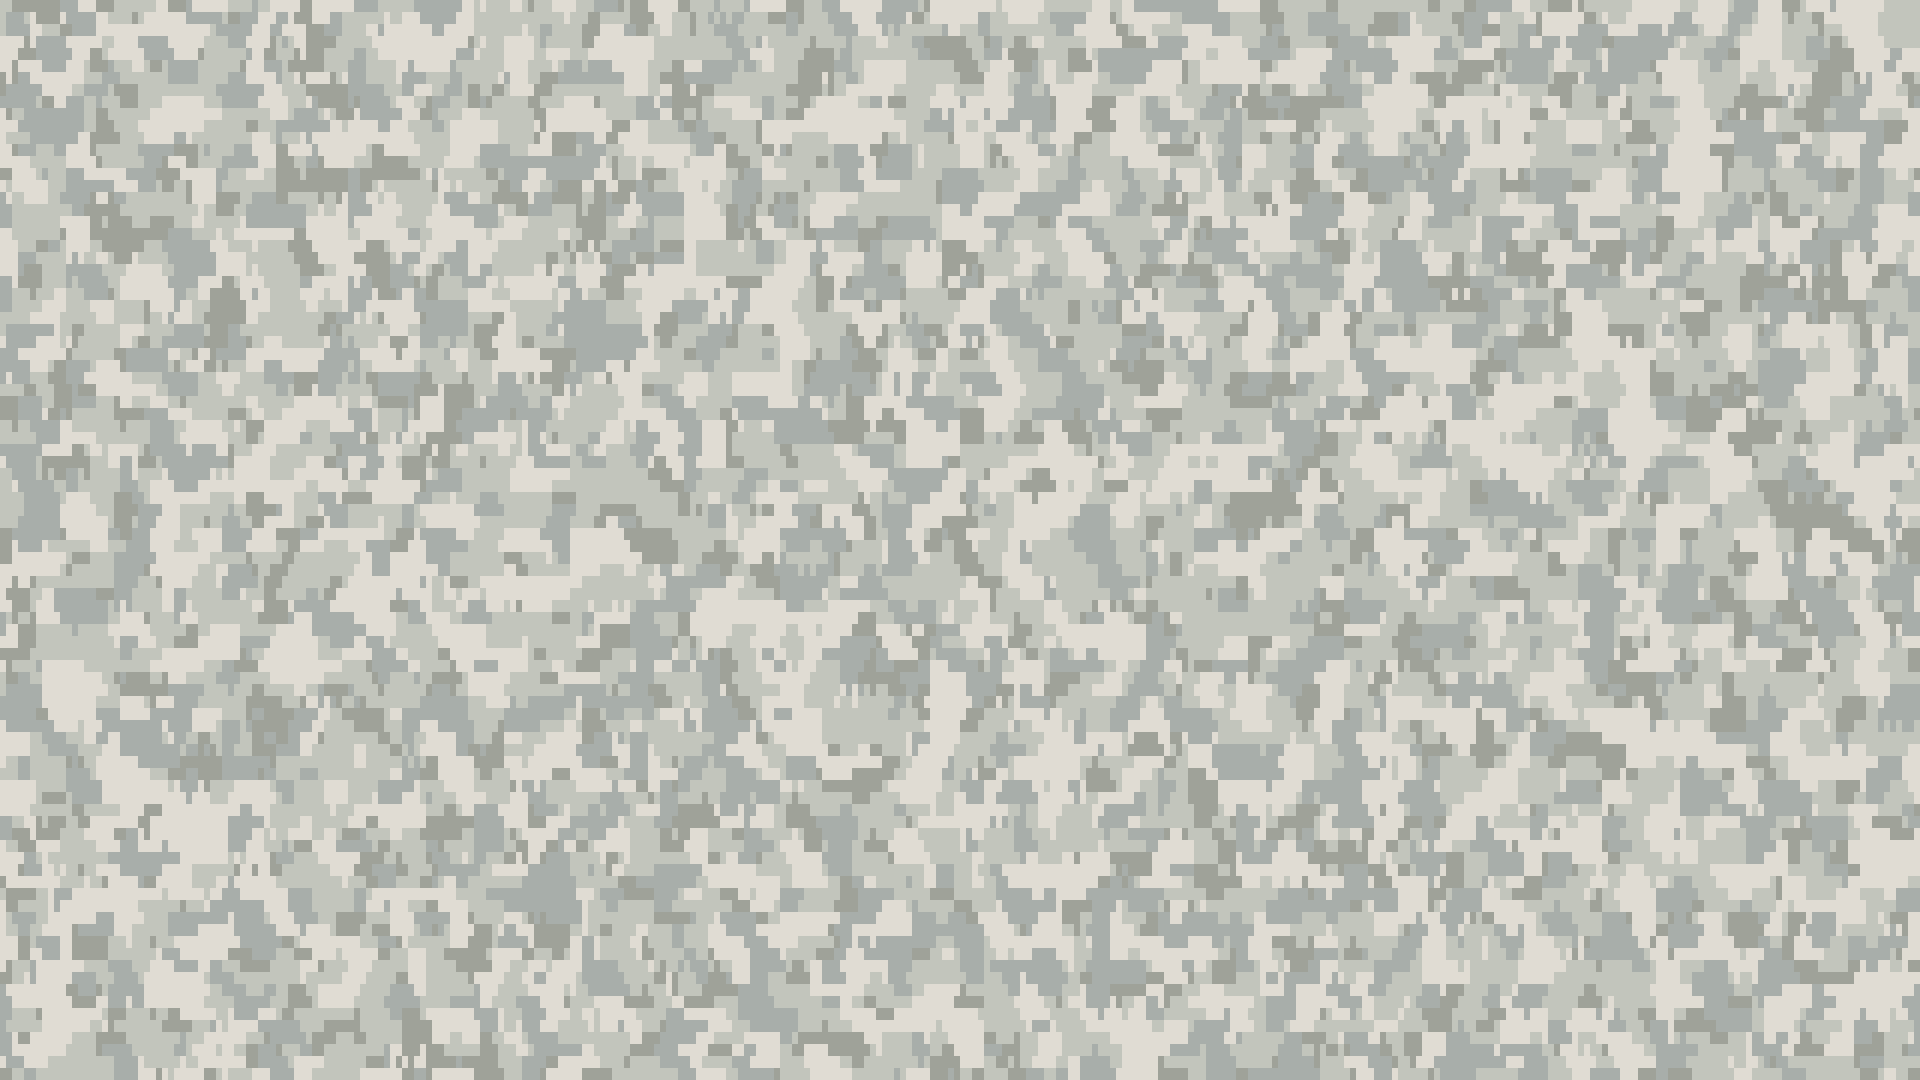 Displaying 15 Images For   Military Digital Camo Wallpaper